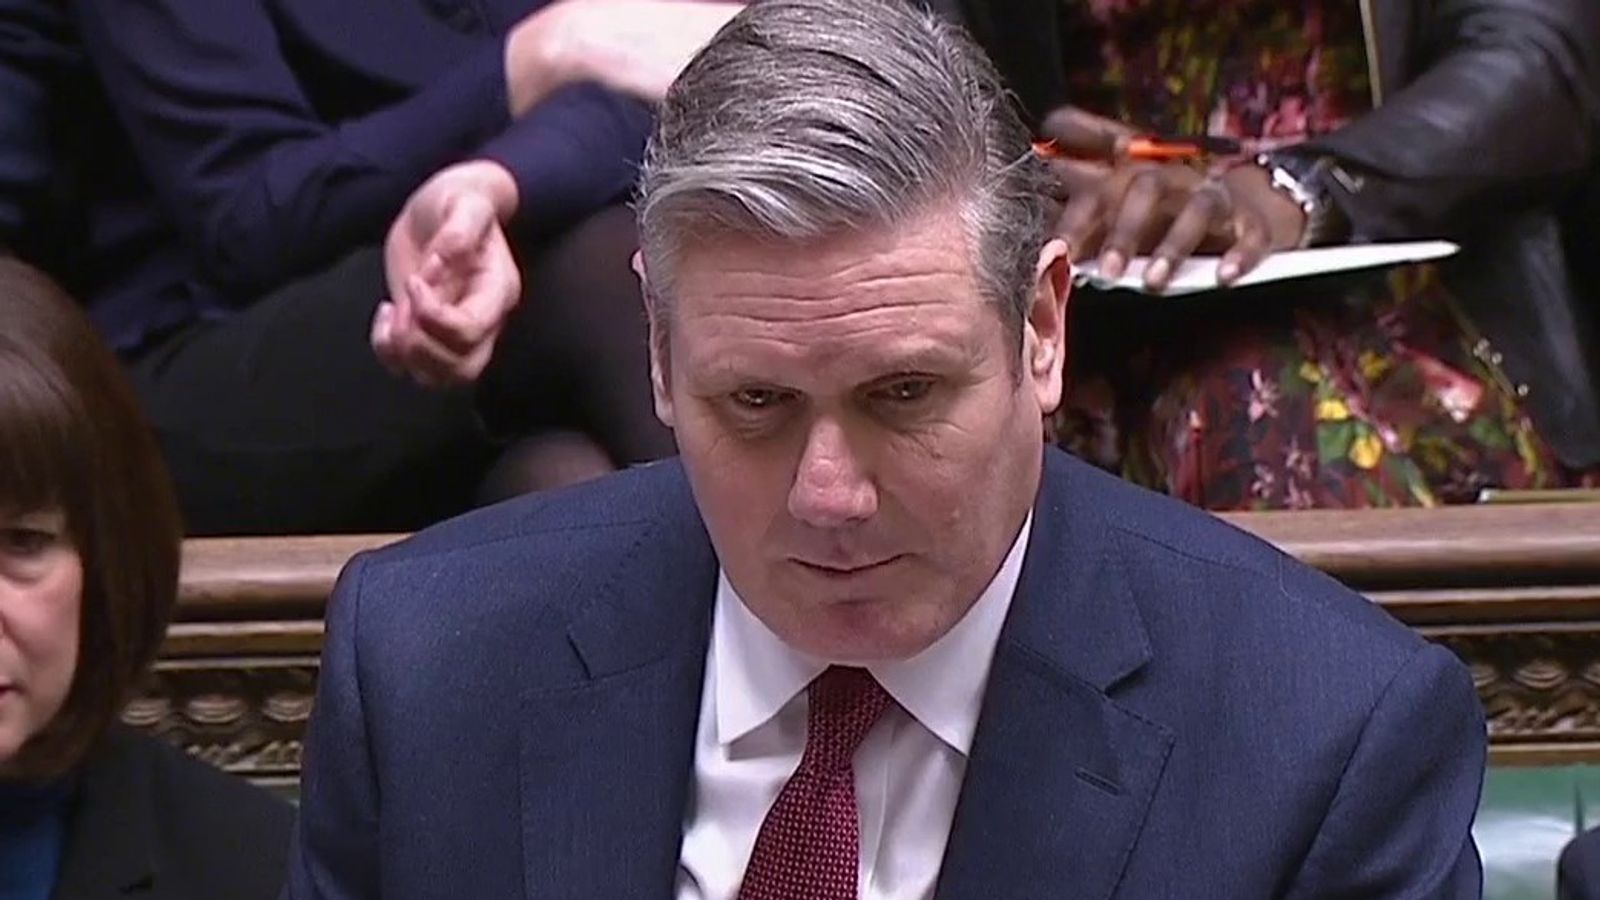 Keir Starmer accuses 'weak' Sunak of harbouring 'extremists' in his party